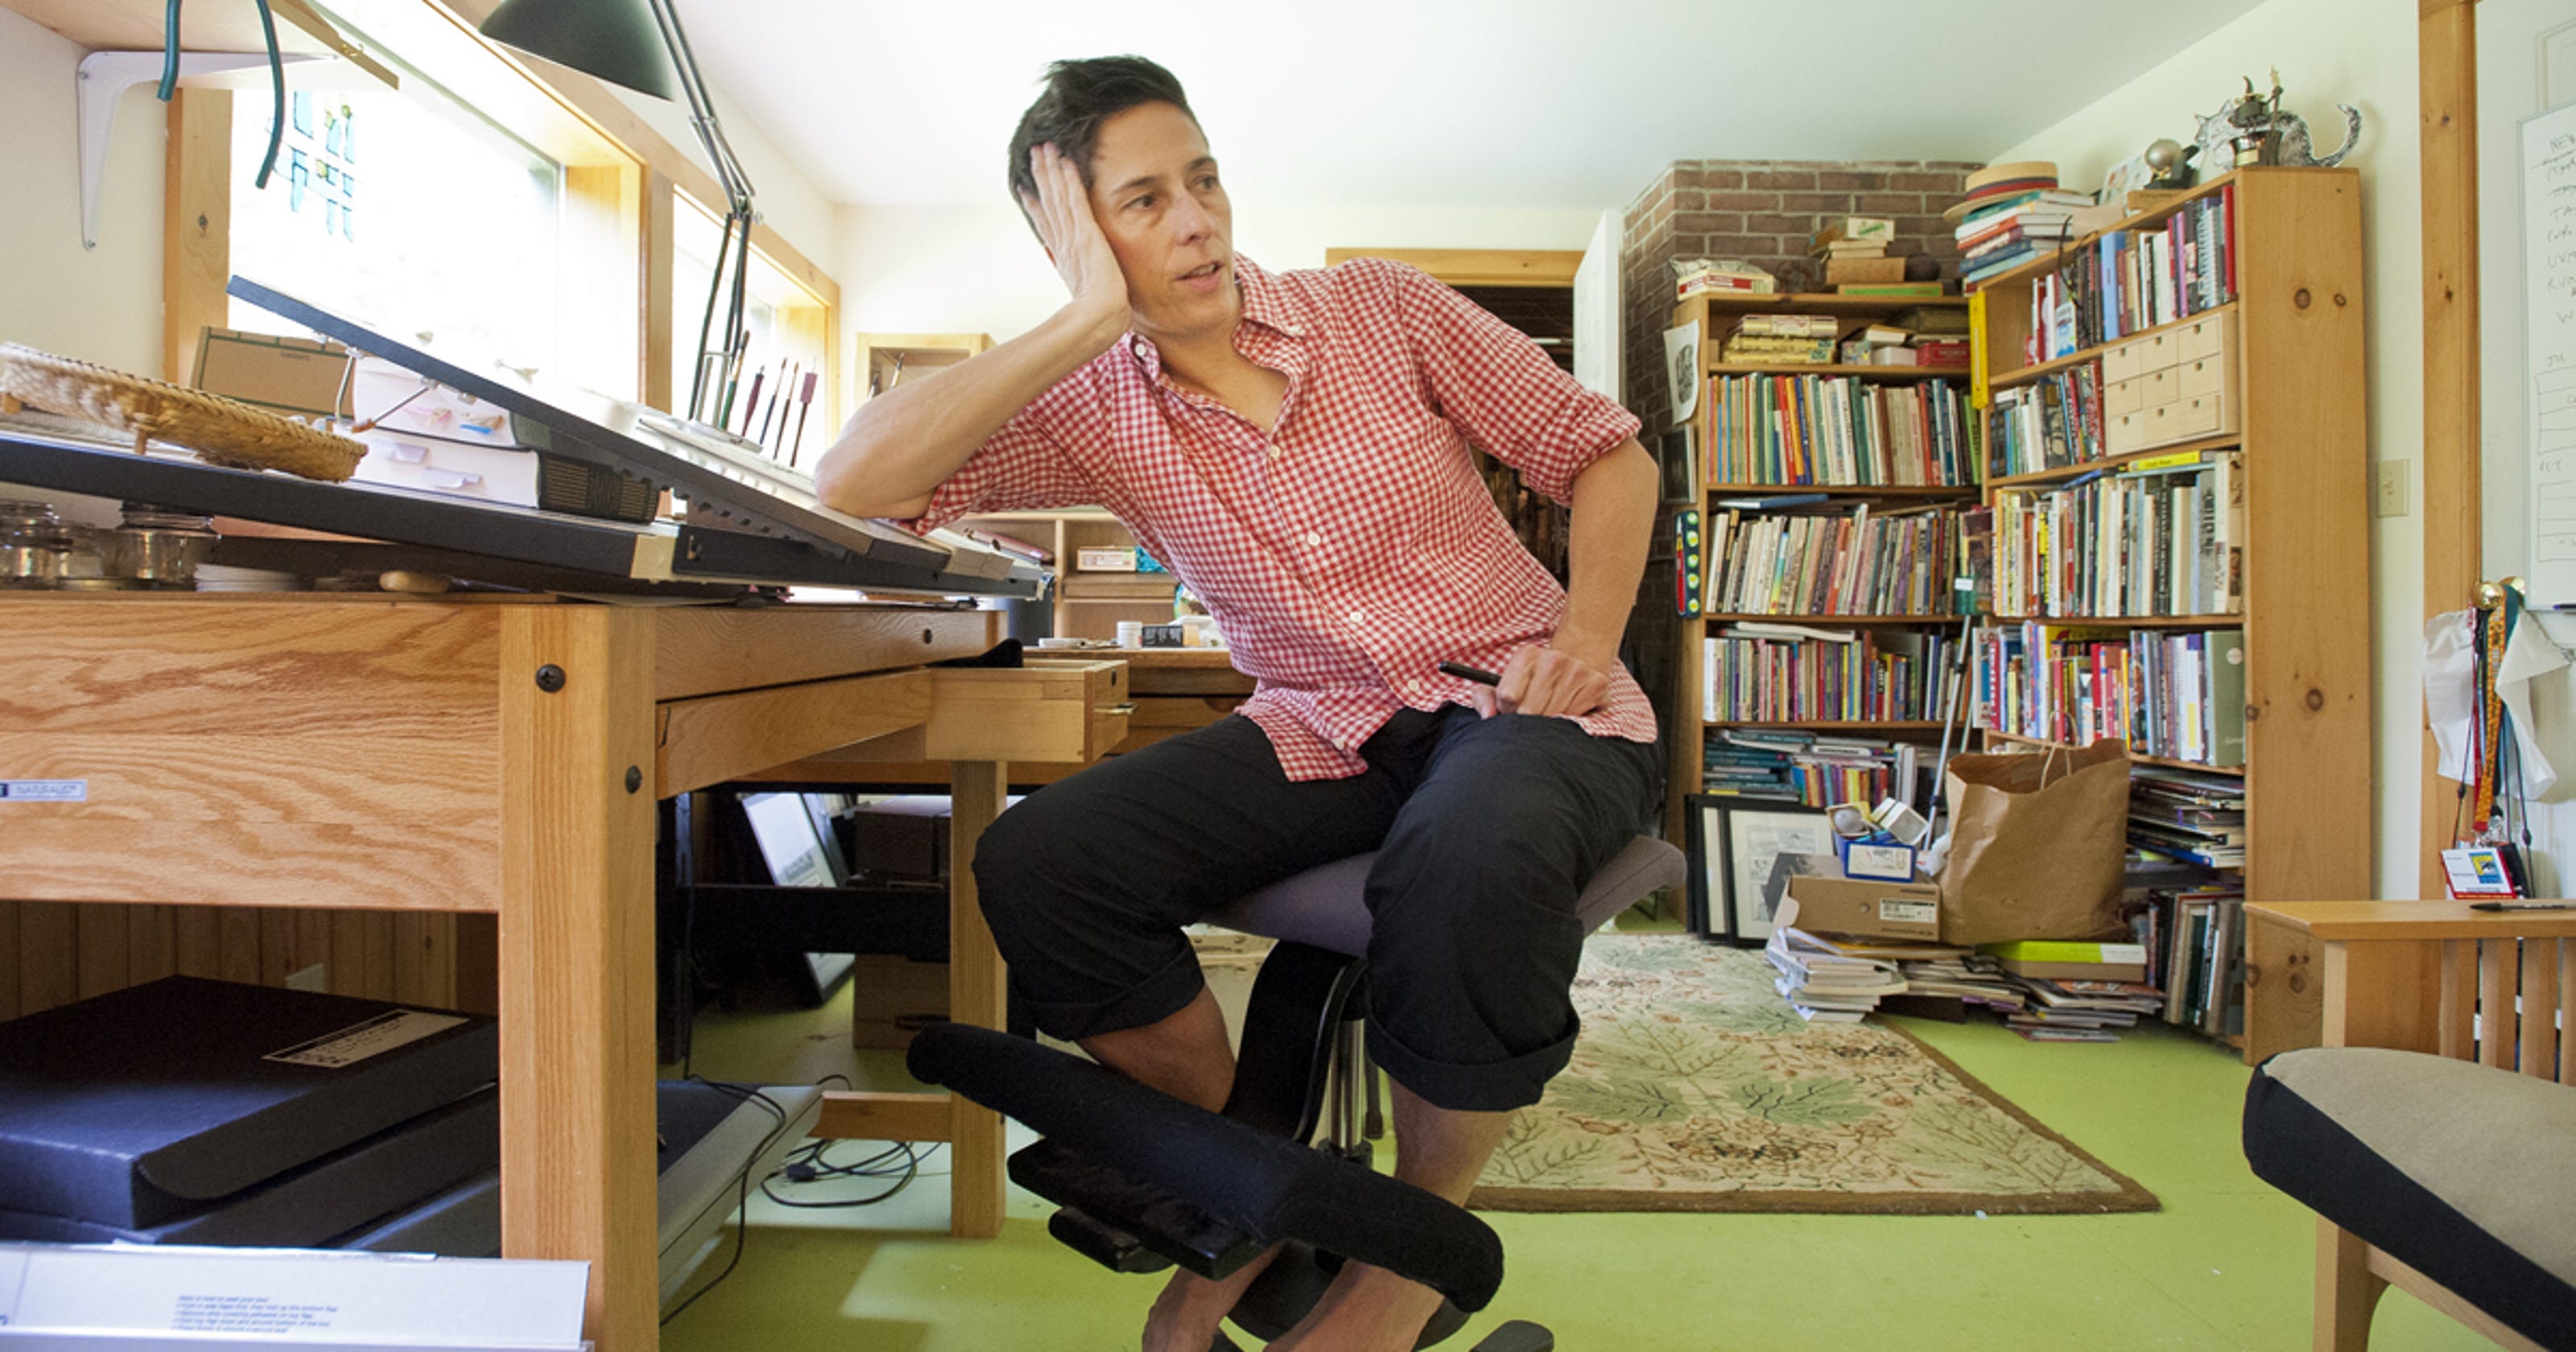 Alison Bechdel From The Archives